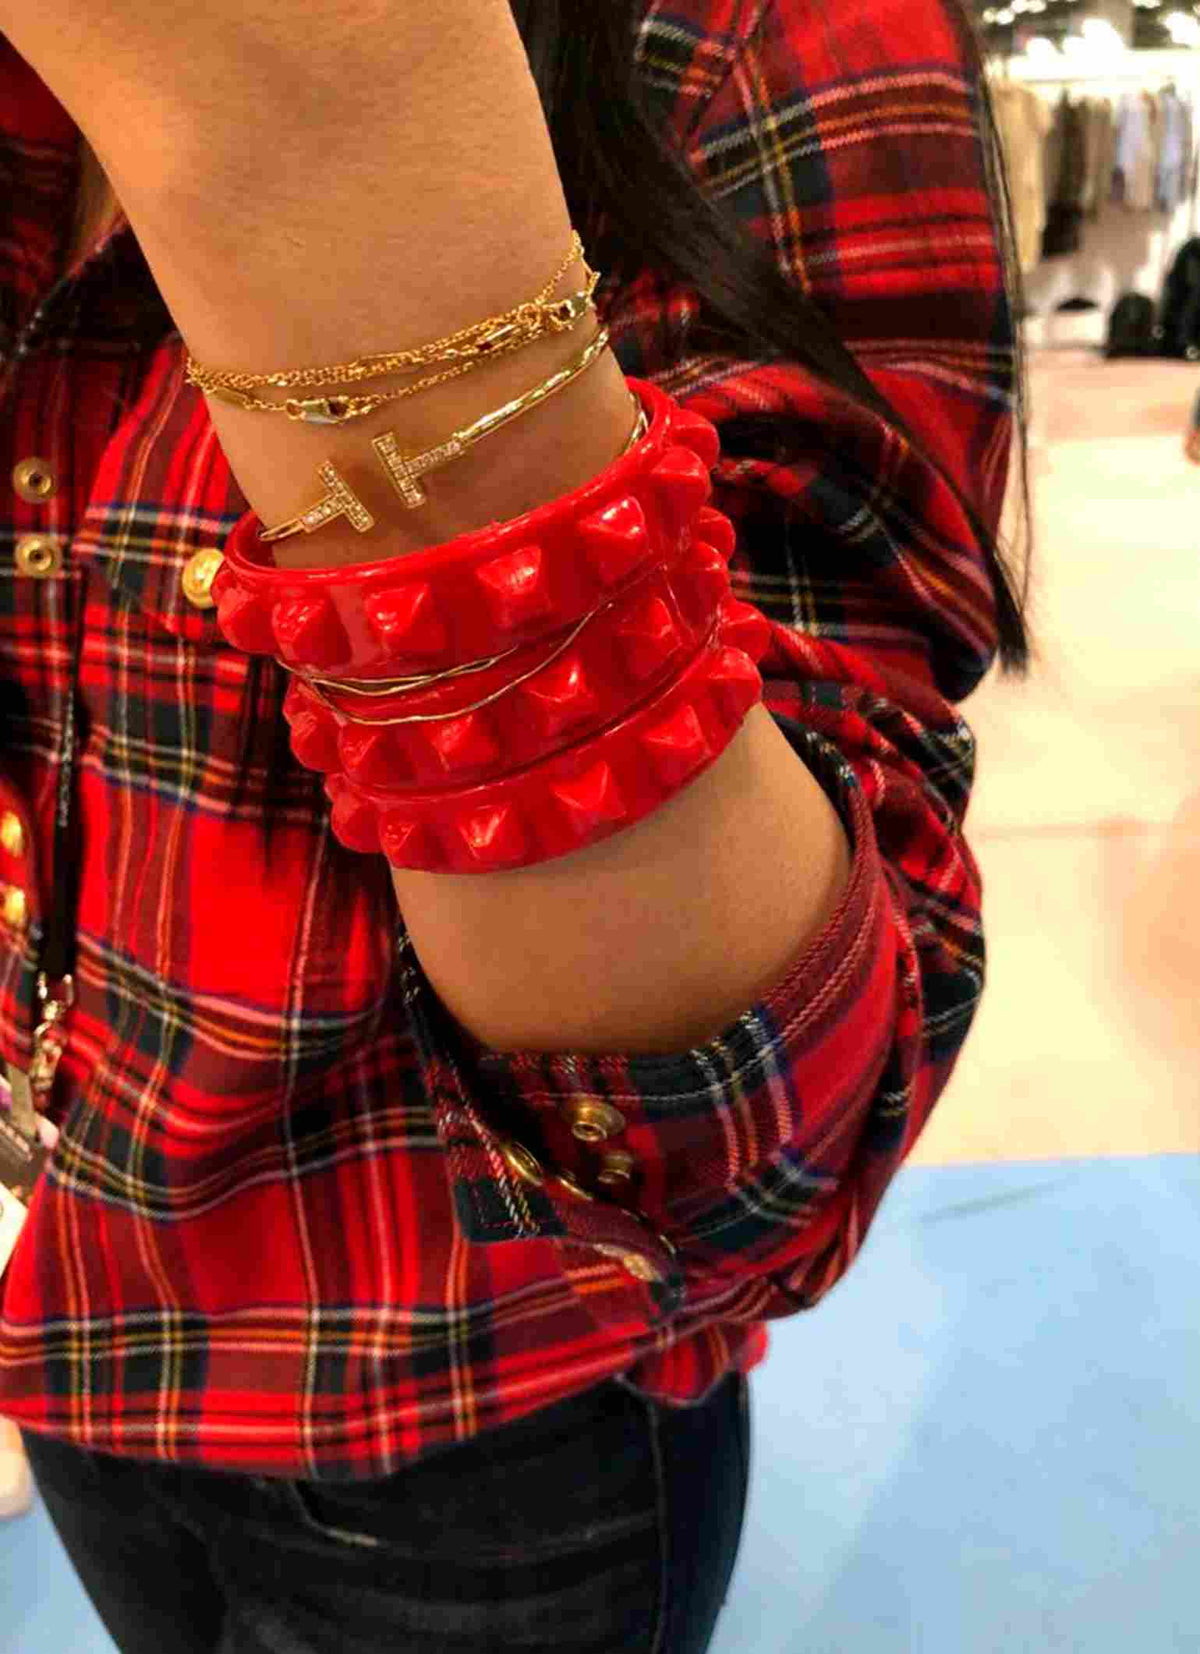 Gold bracelets and jelly bracelets in red stackable with Cartier bracelets